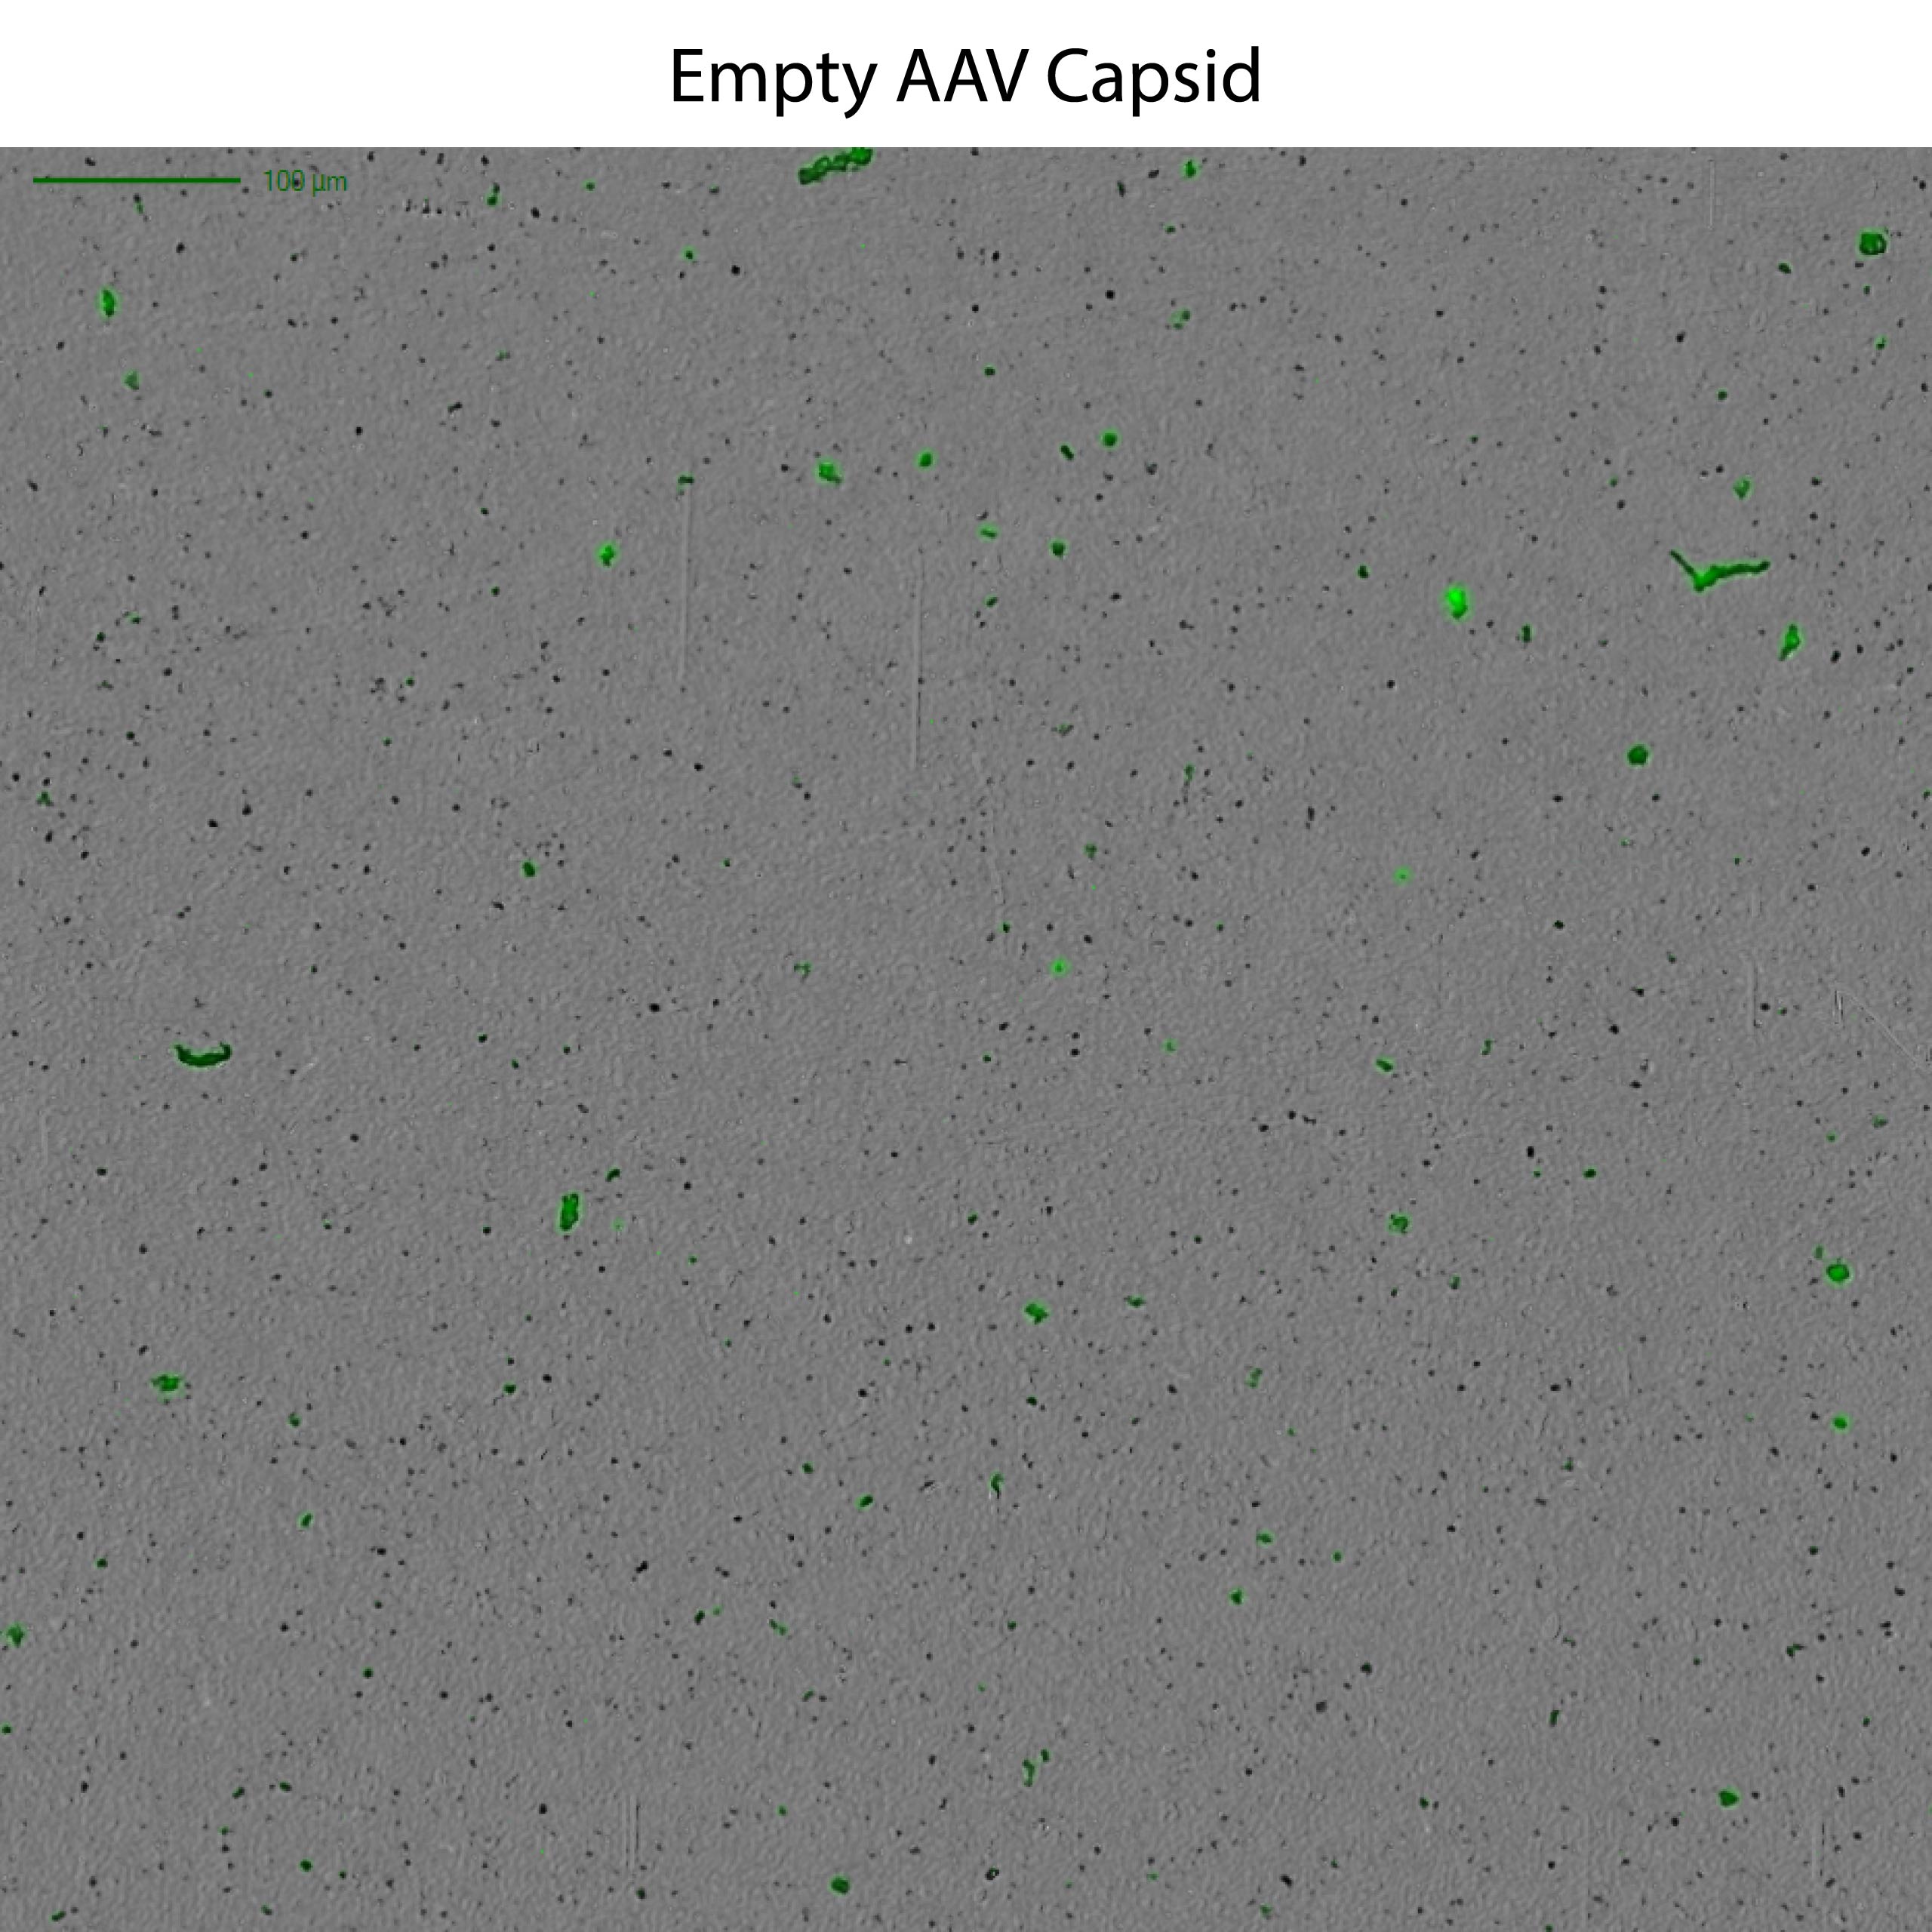 Empty AAV capsids are easily idenfied using the Aura GT system.